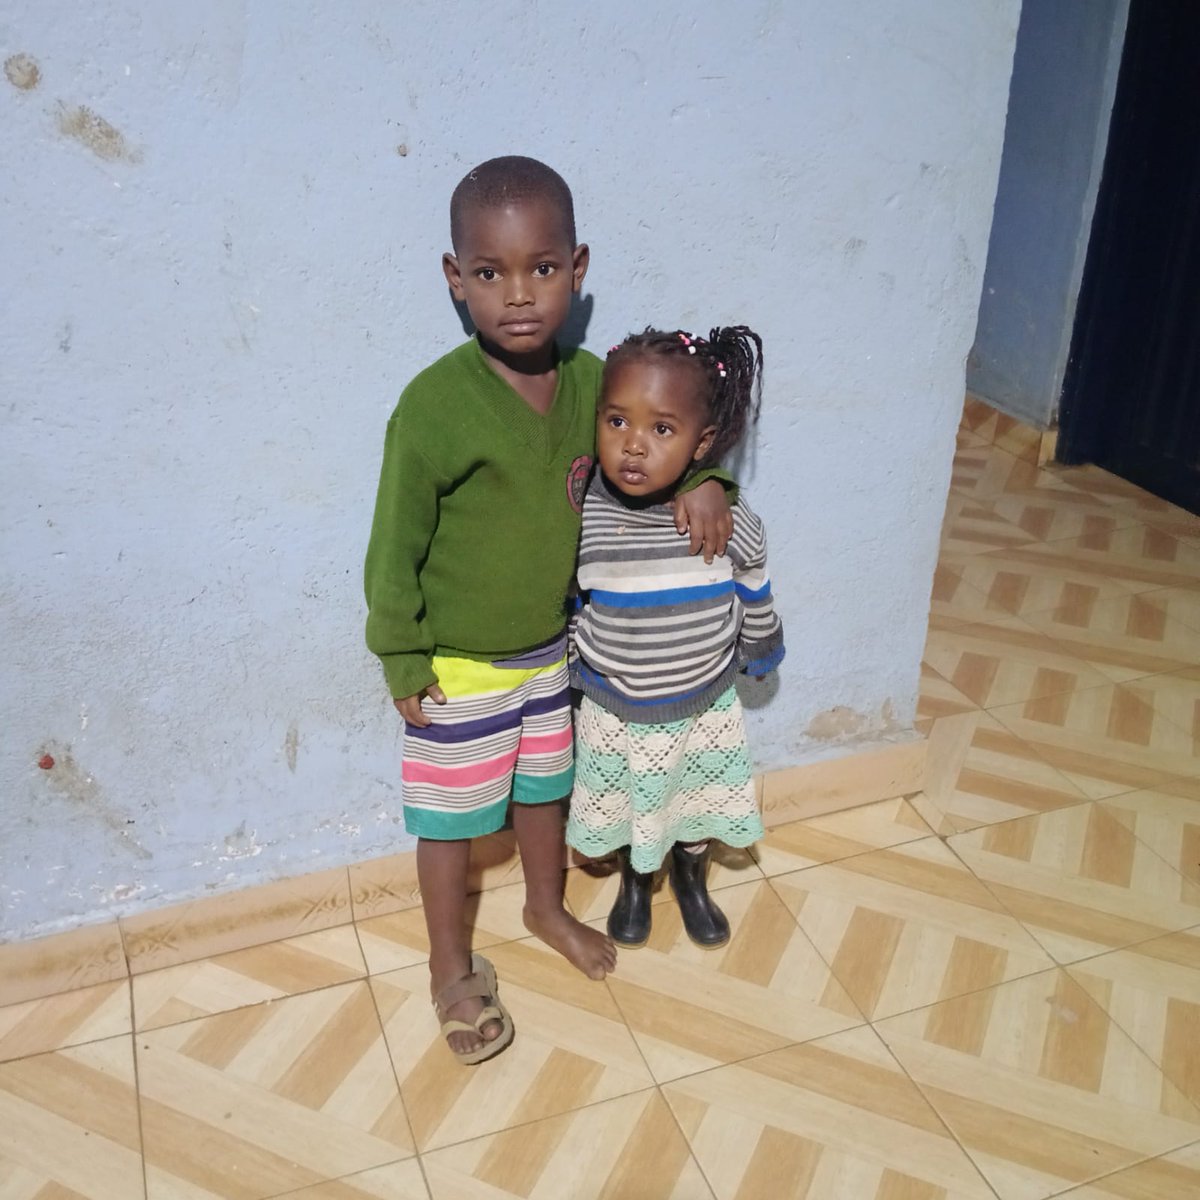 DO YOU KNOW THEM? These two little angels were last night found stranded at Makongeni Phase 4 and taken to Makongeni Police Station by a good Samaritan. In case you know them, please notify their parents to collect them from there.